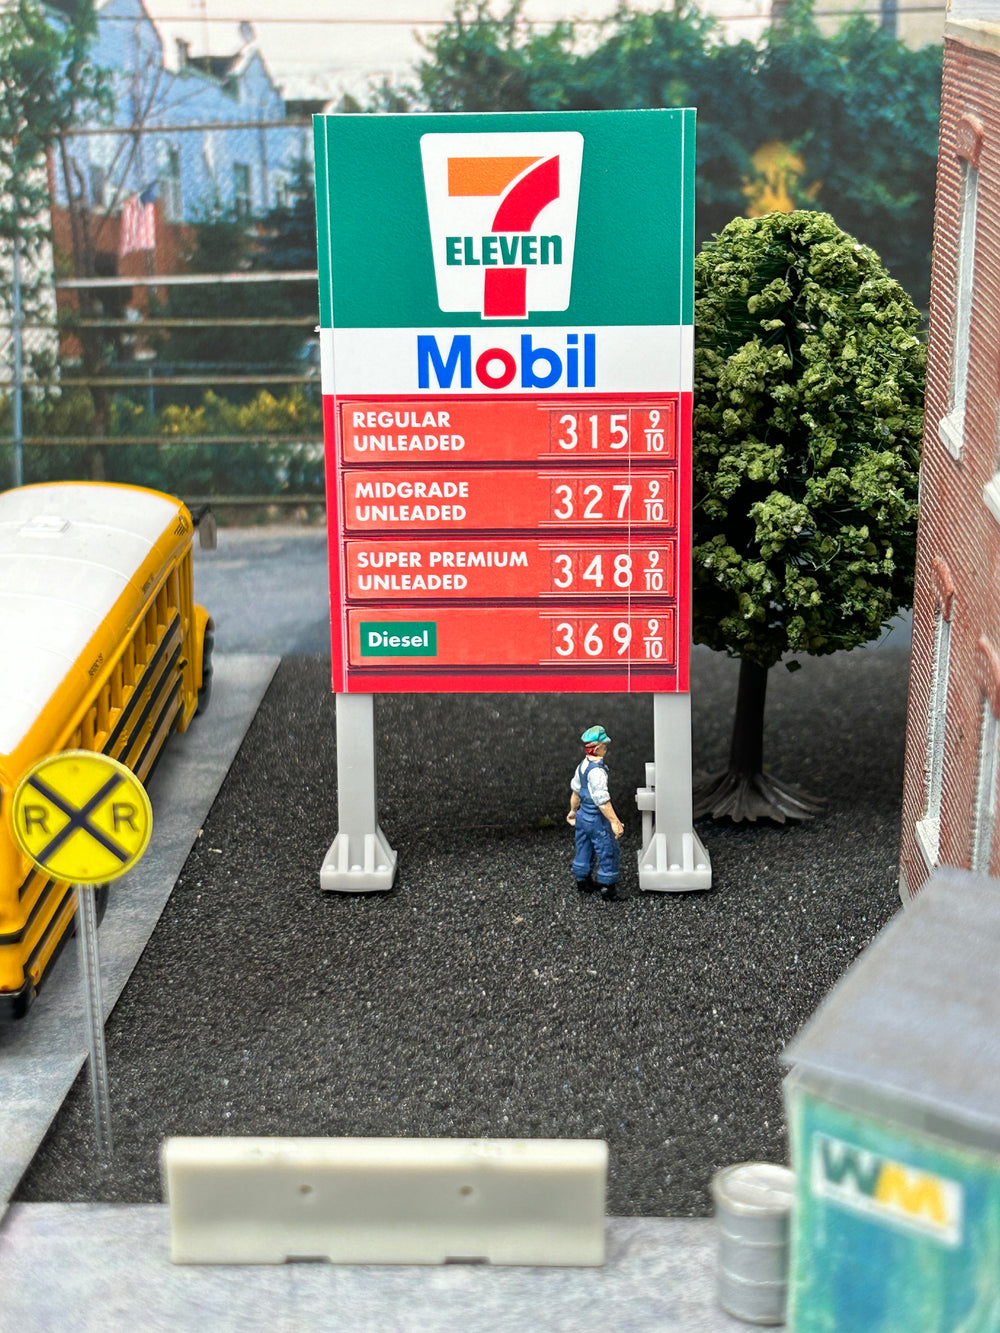 🟢 7-11 with Mobil